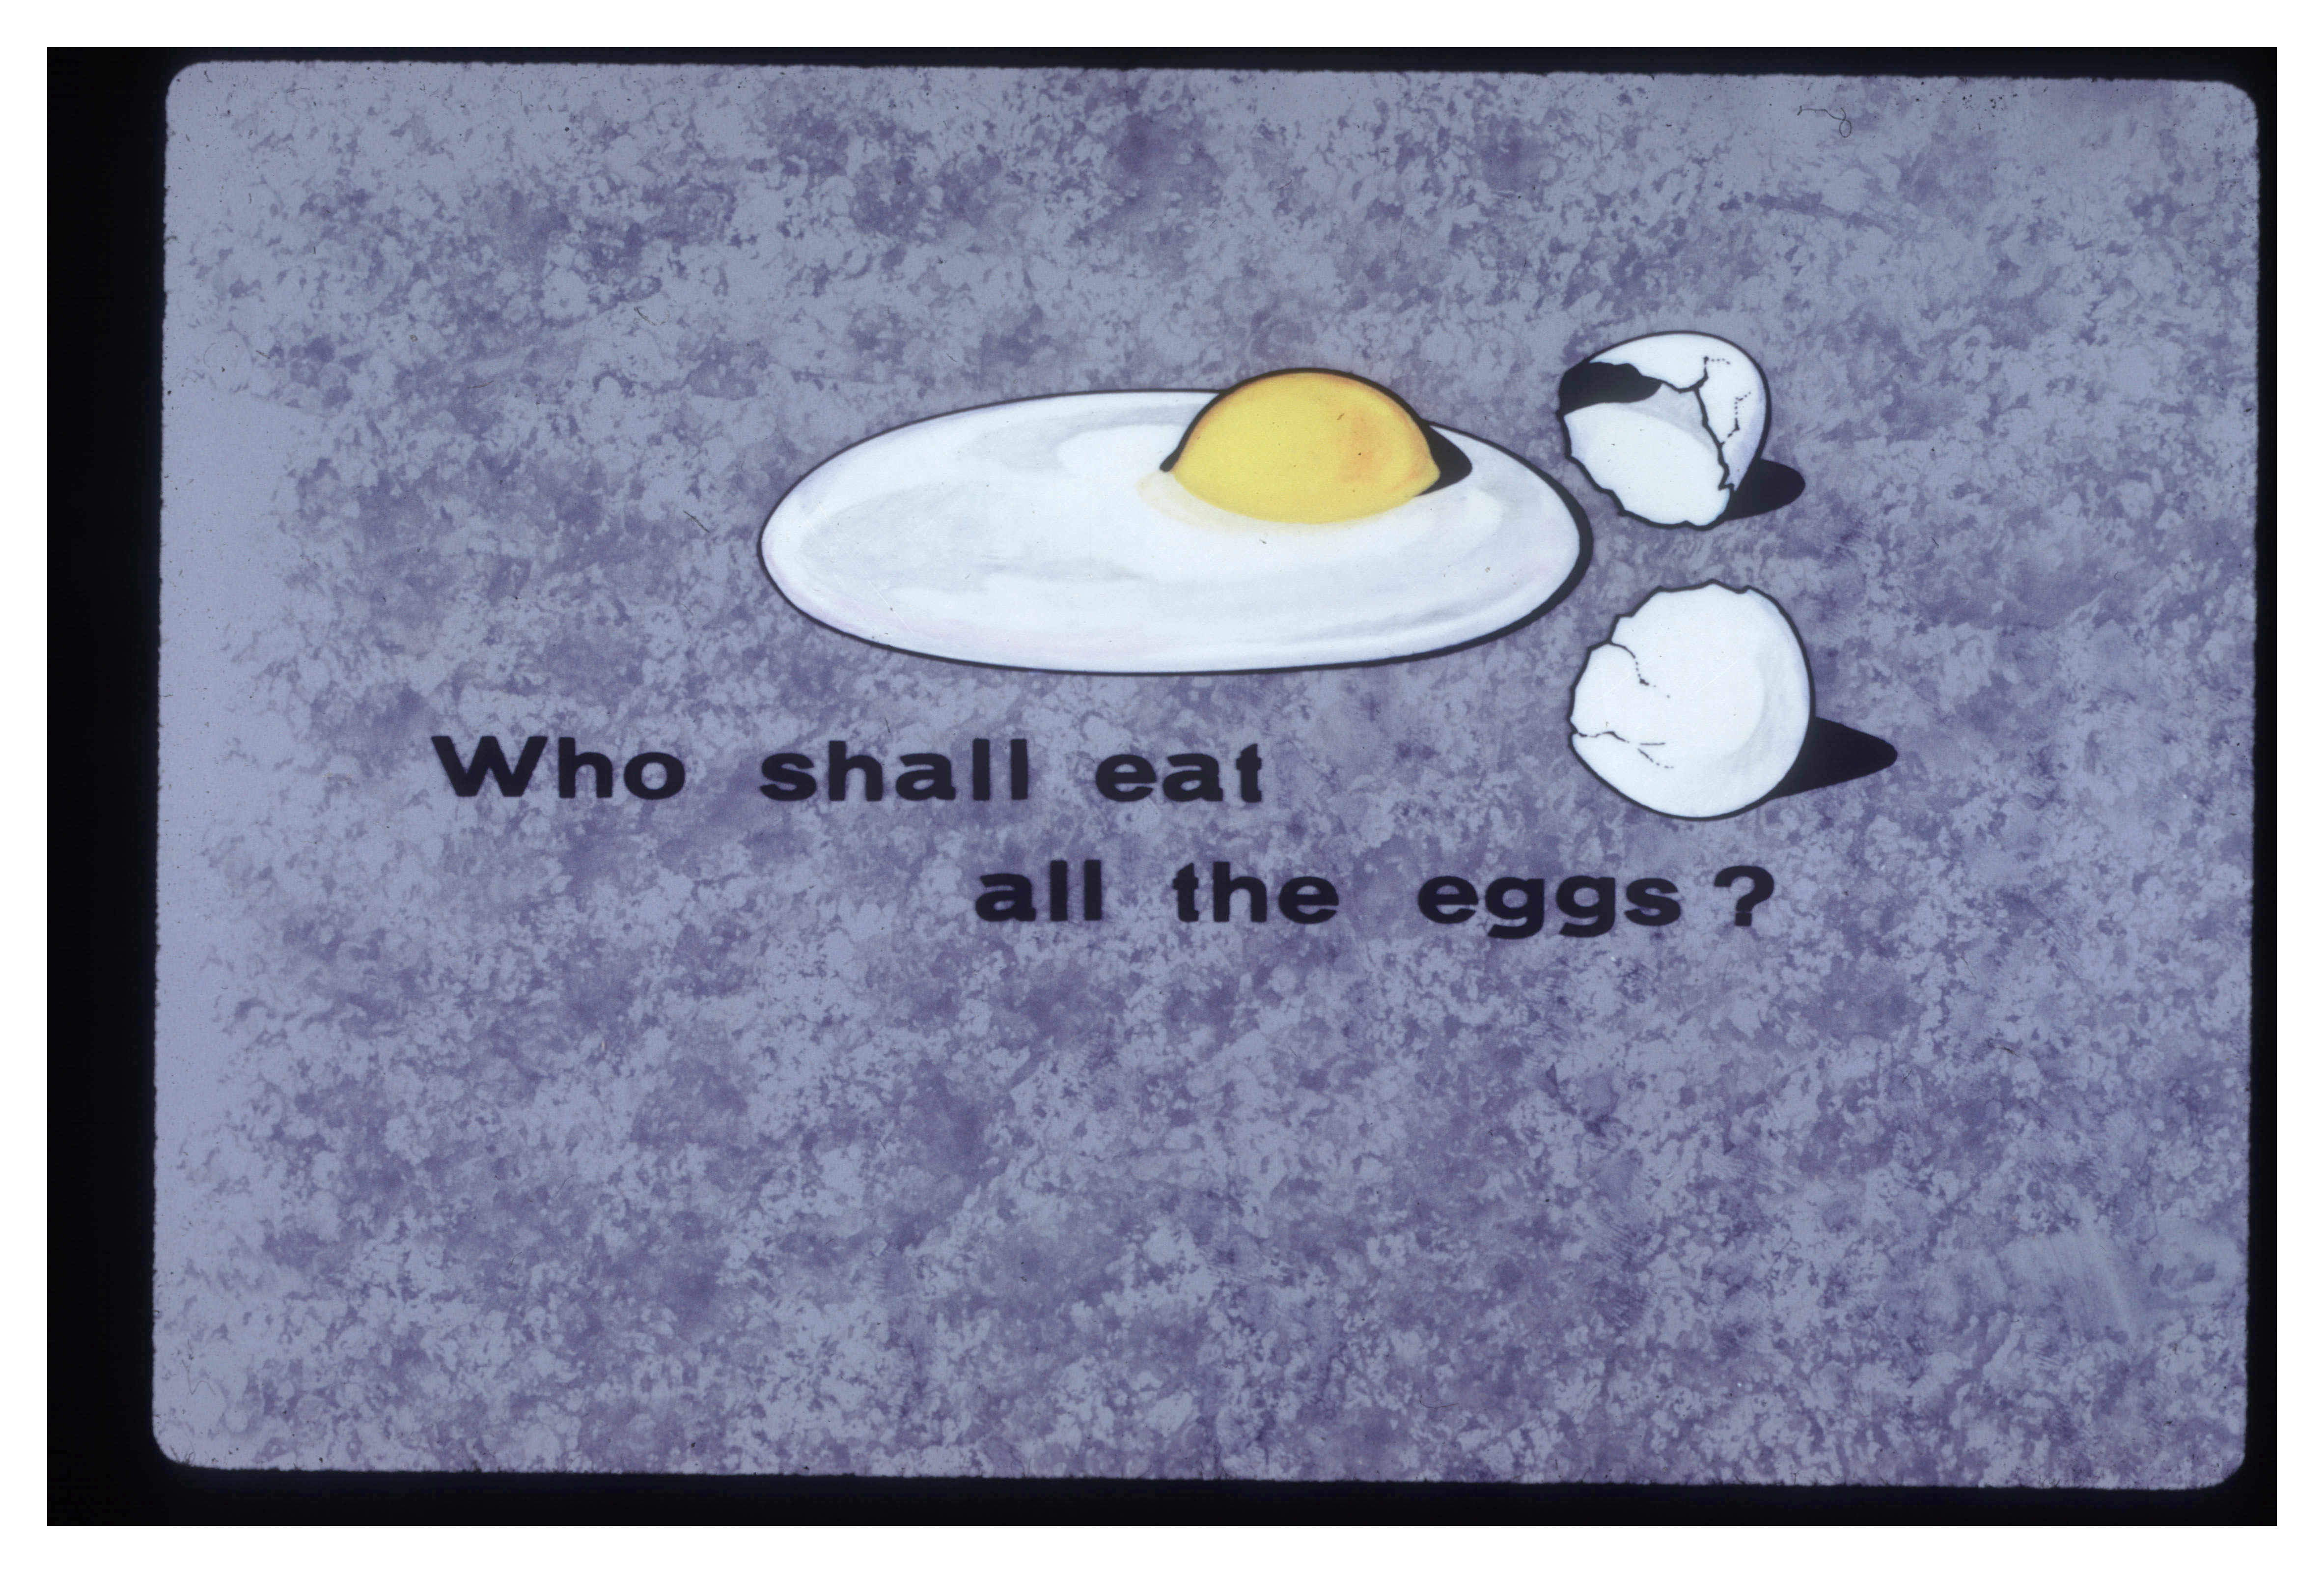 Awareness campaign for high cholesterol content in eggs in 1970